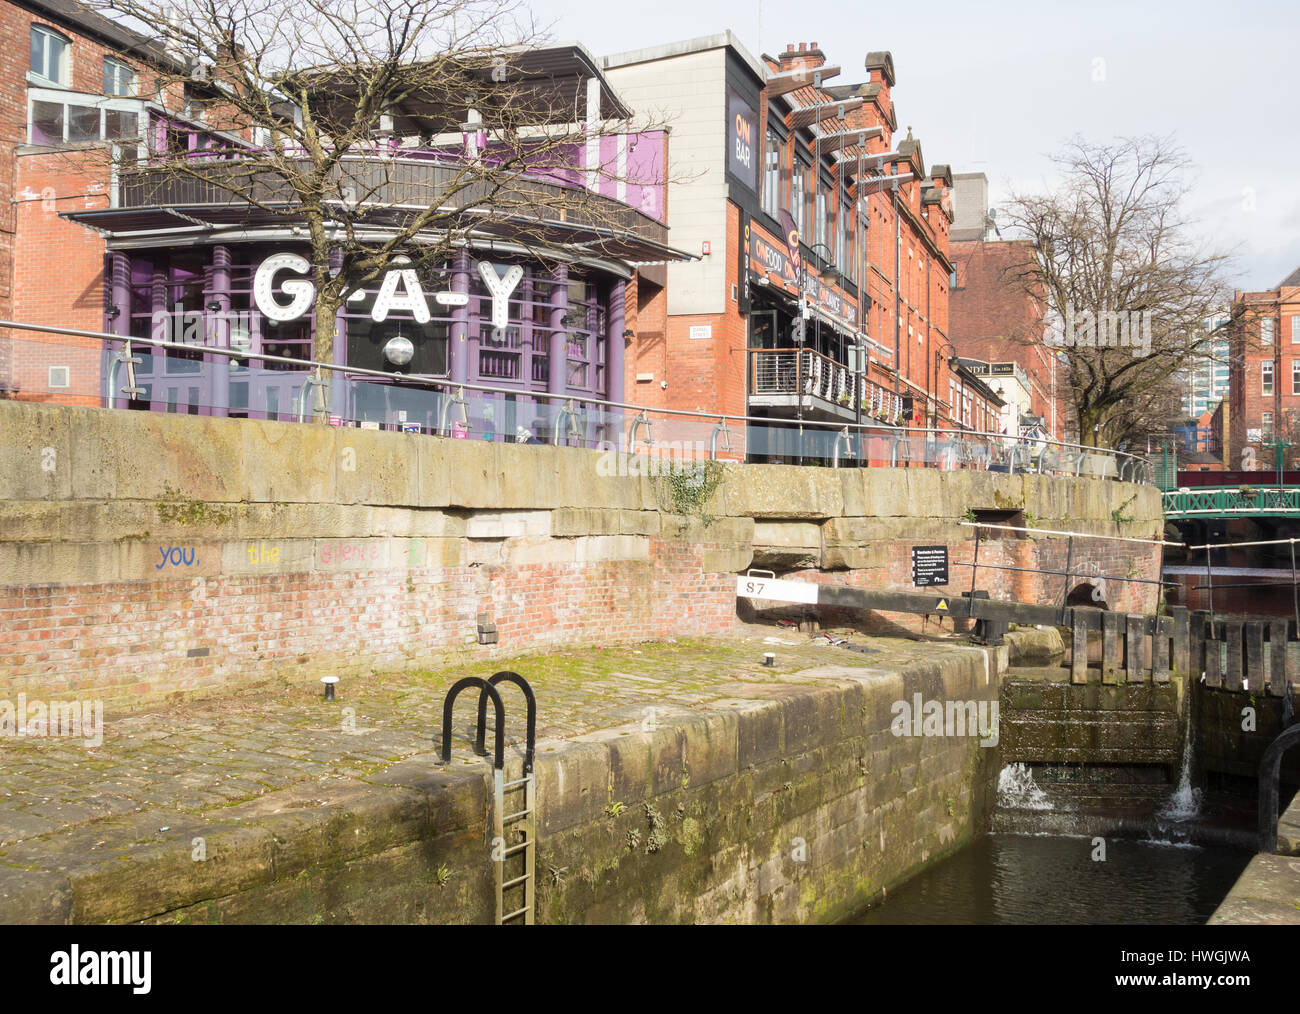 Canal street in Manchester`s Gay village. Manchester, England. UK Stock Photo